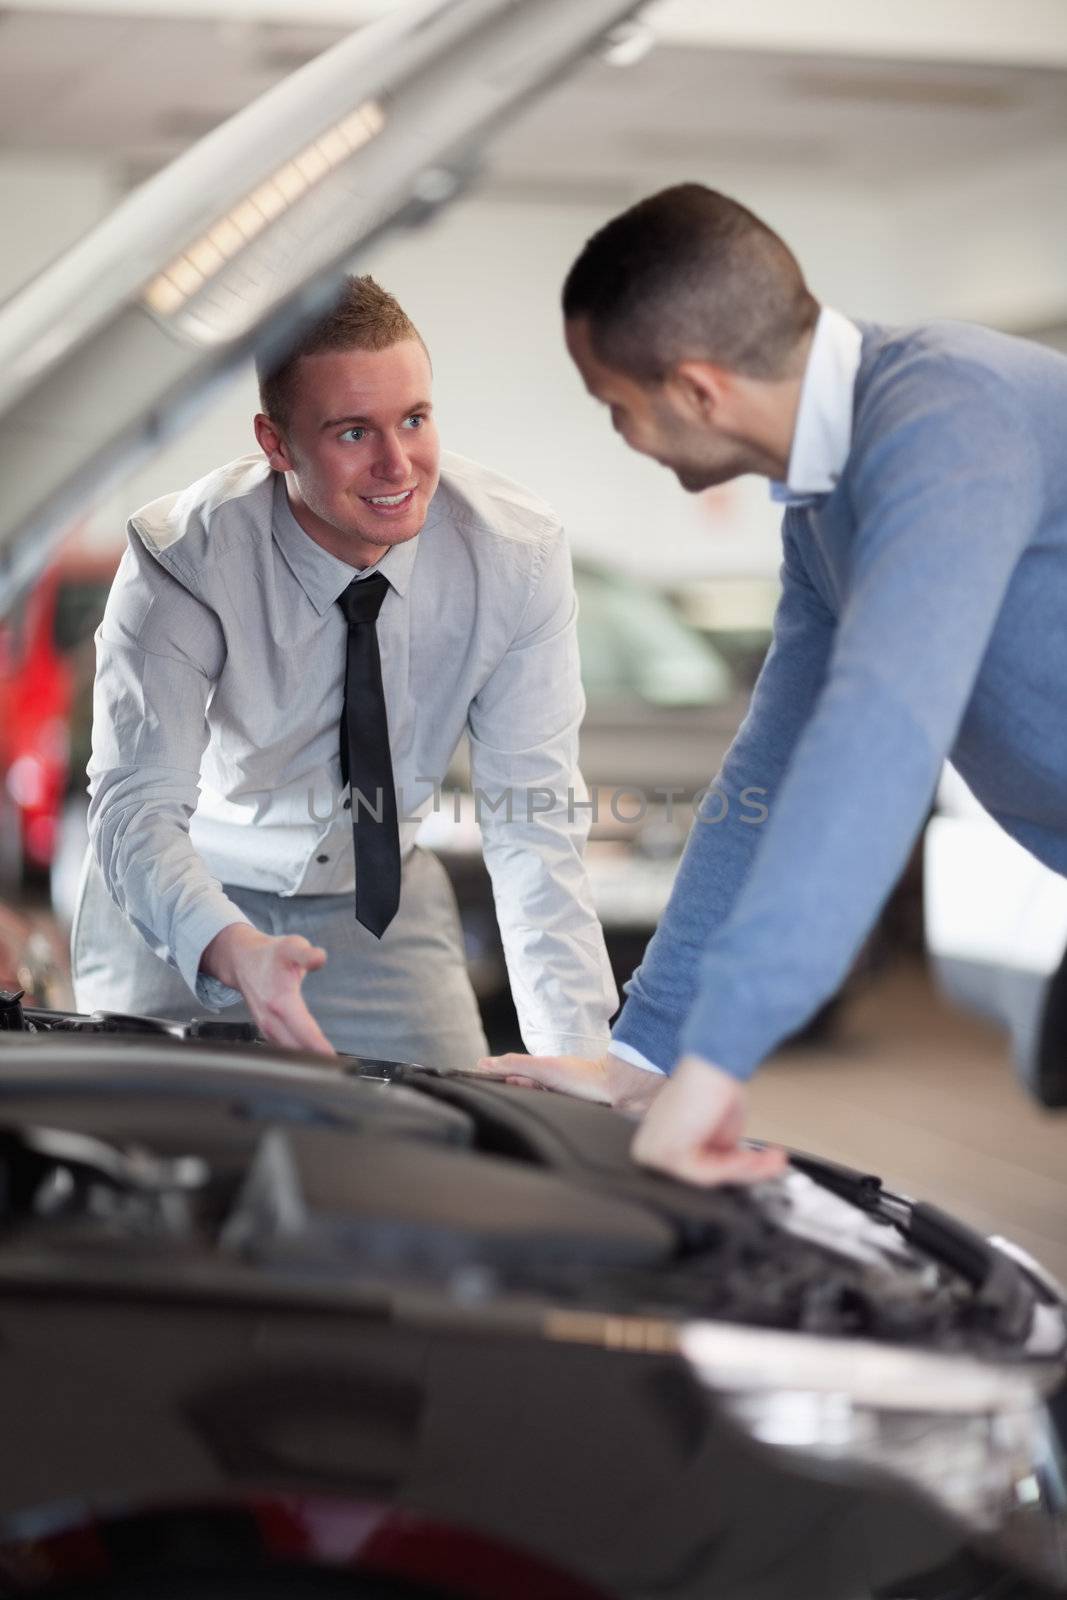 Two men looking at a car engine in a car shop